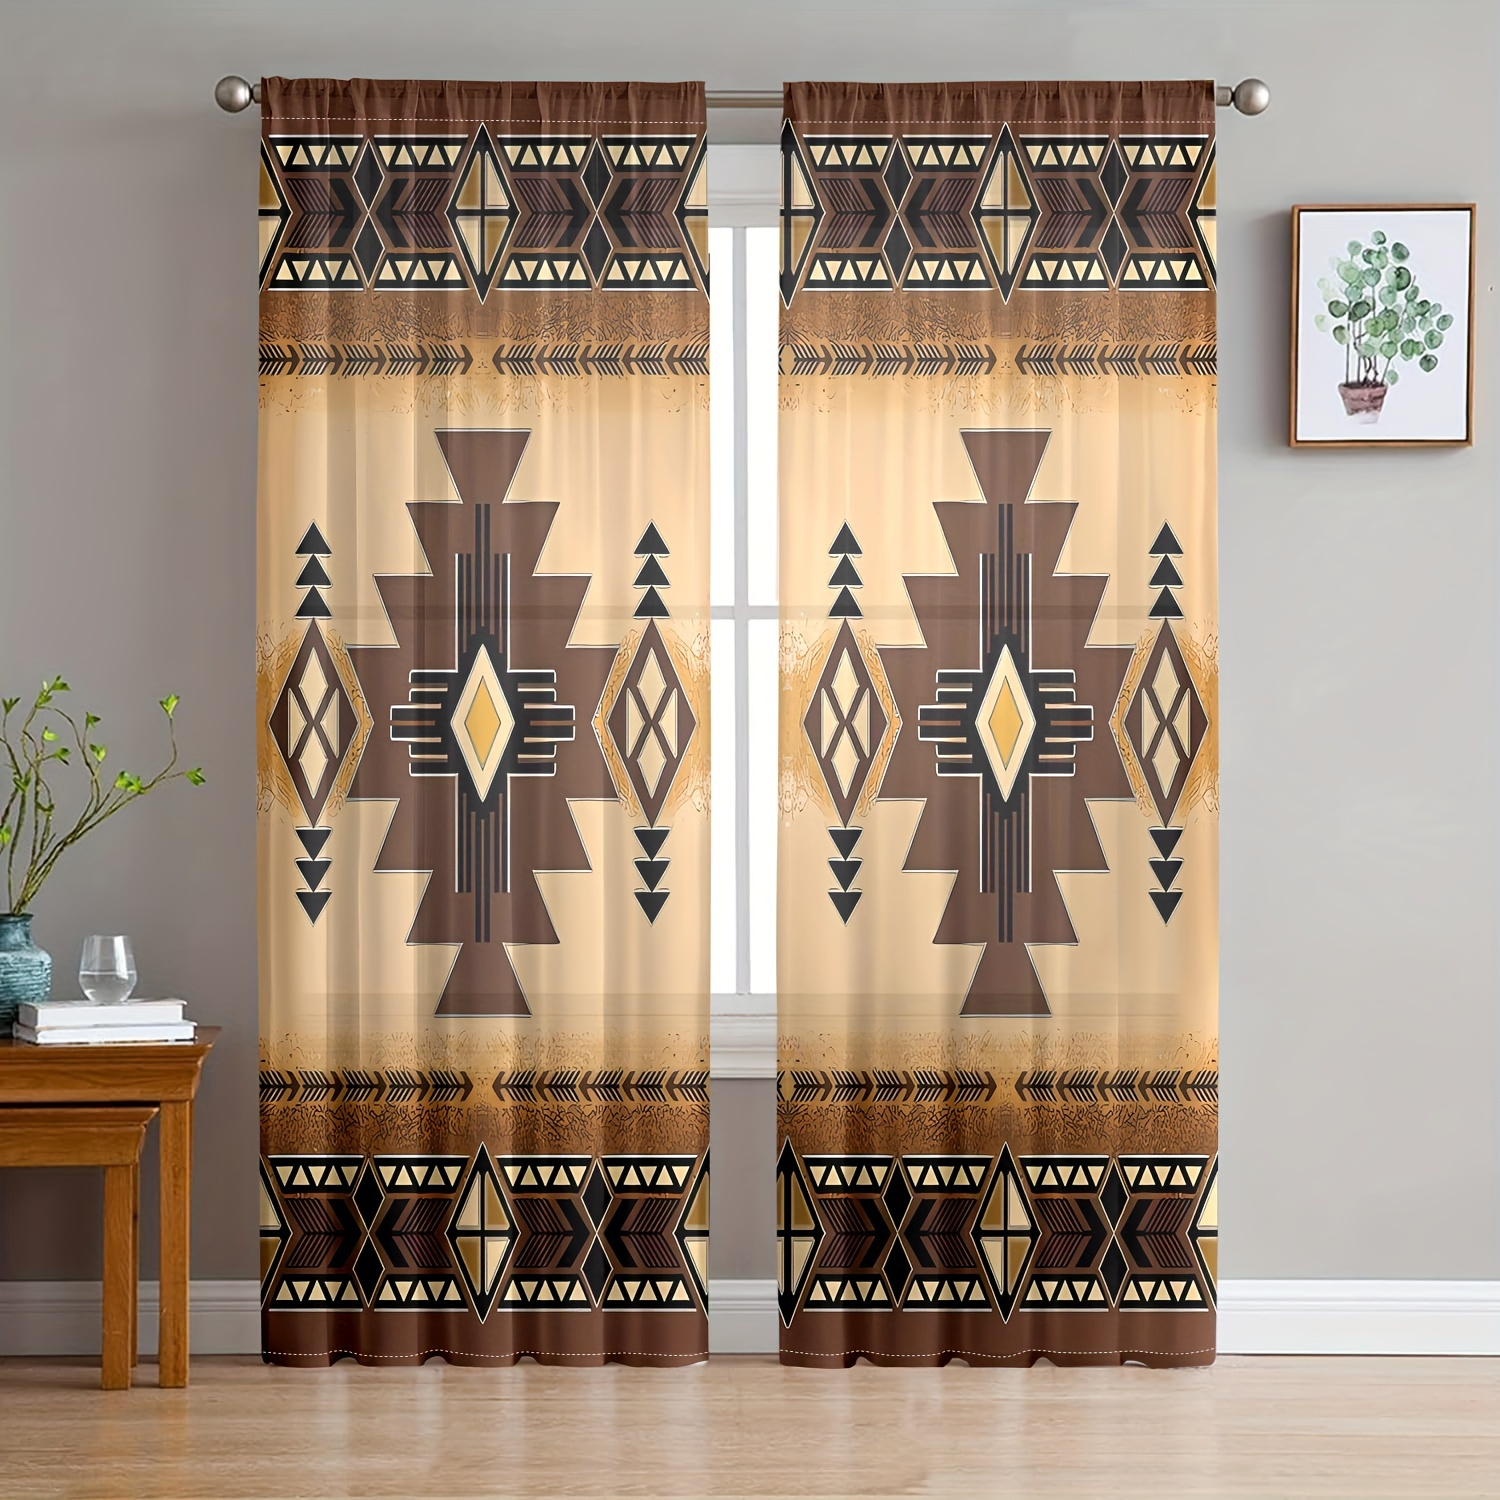 

2-piece Bohemian Chic Aztec Print Curtains - Semi-transparent, Privacy-enhancing Drapes For Living Room & Bedroom, Rod Pocket Design, Machine Washable